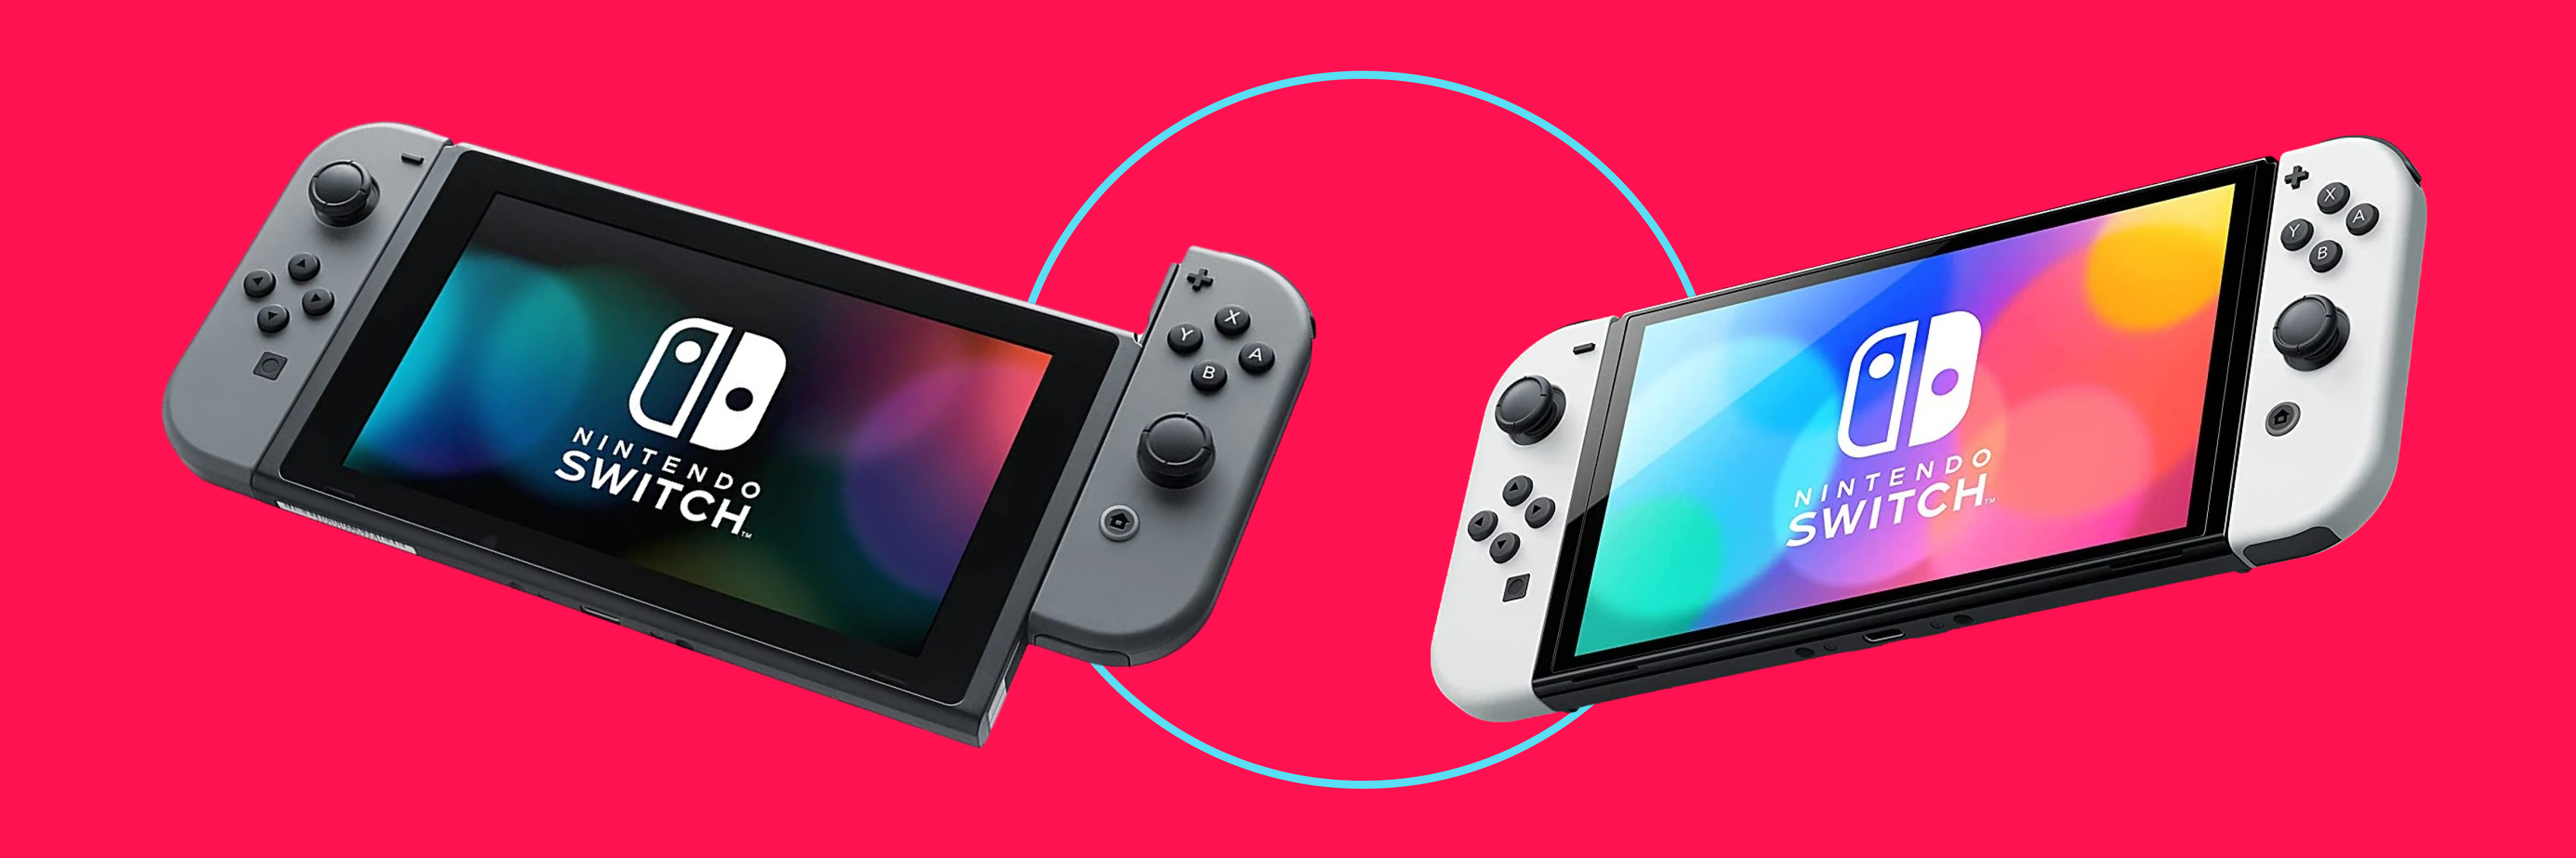 Nintendo Switch OLED vs. Original - Screen Resolution and Size